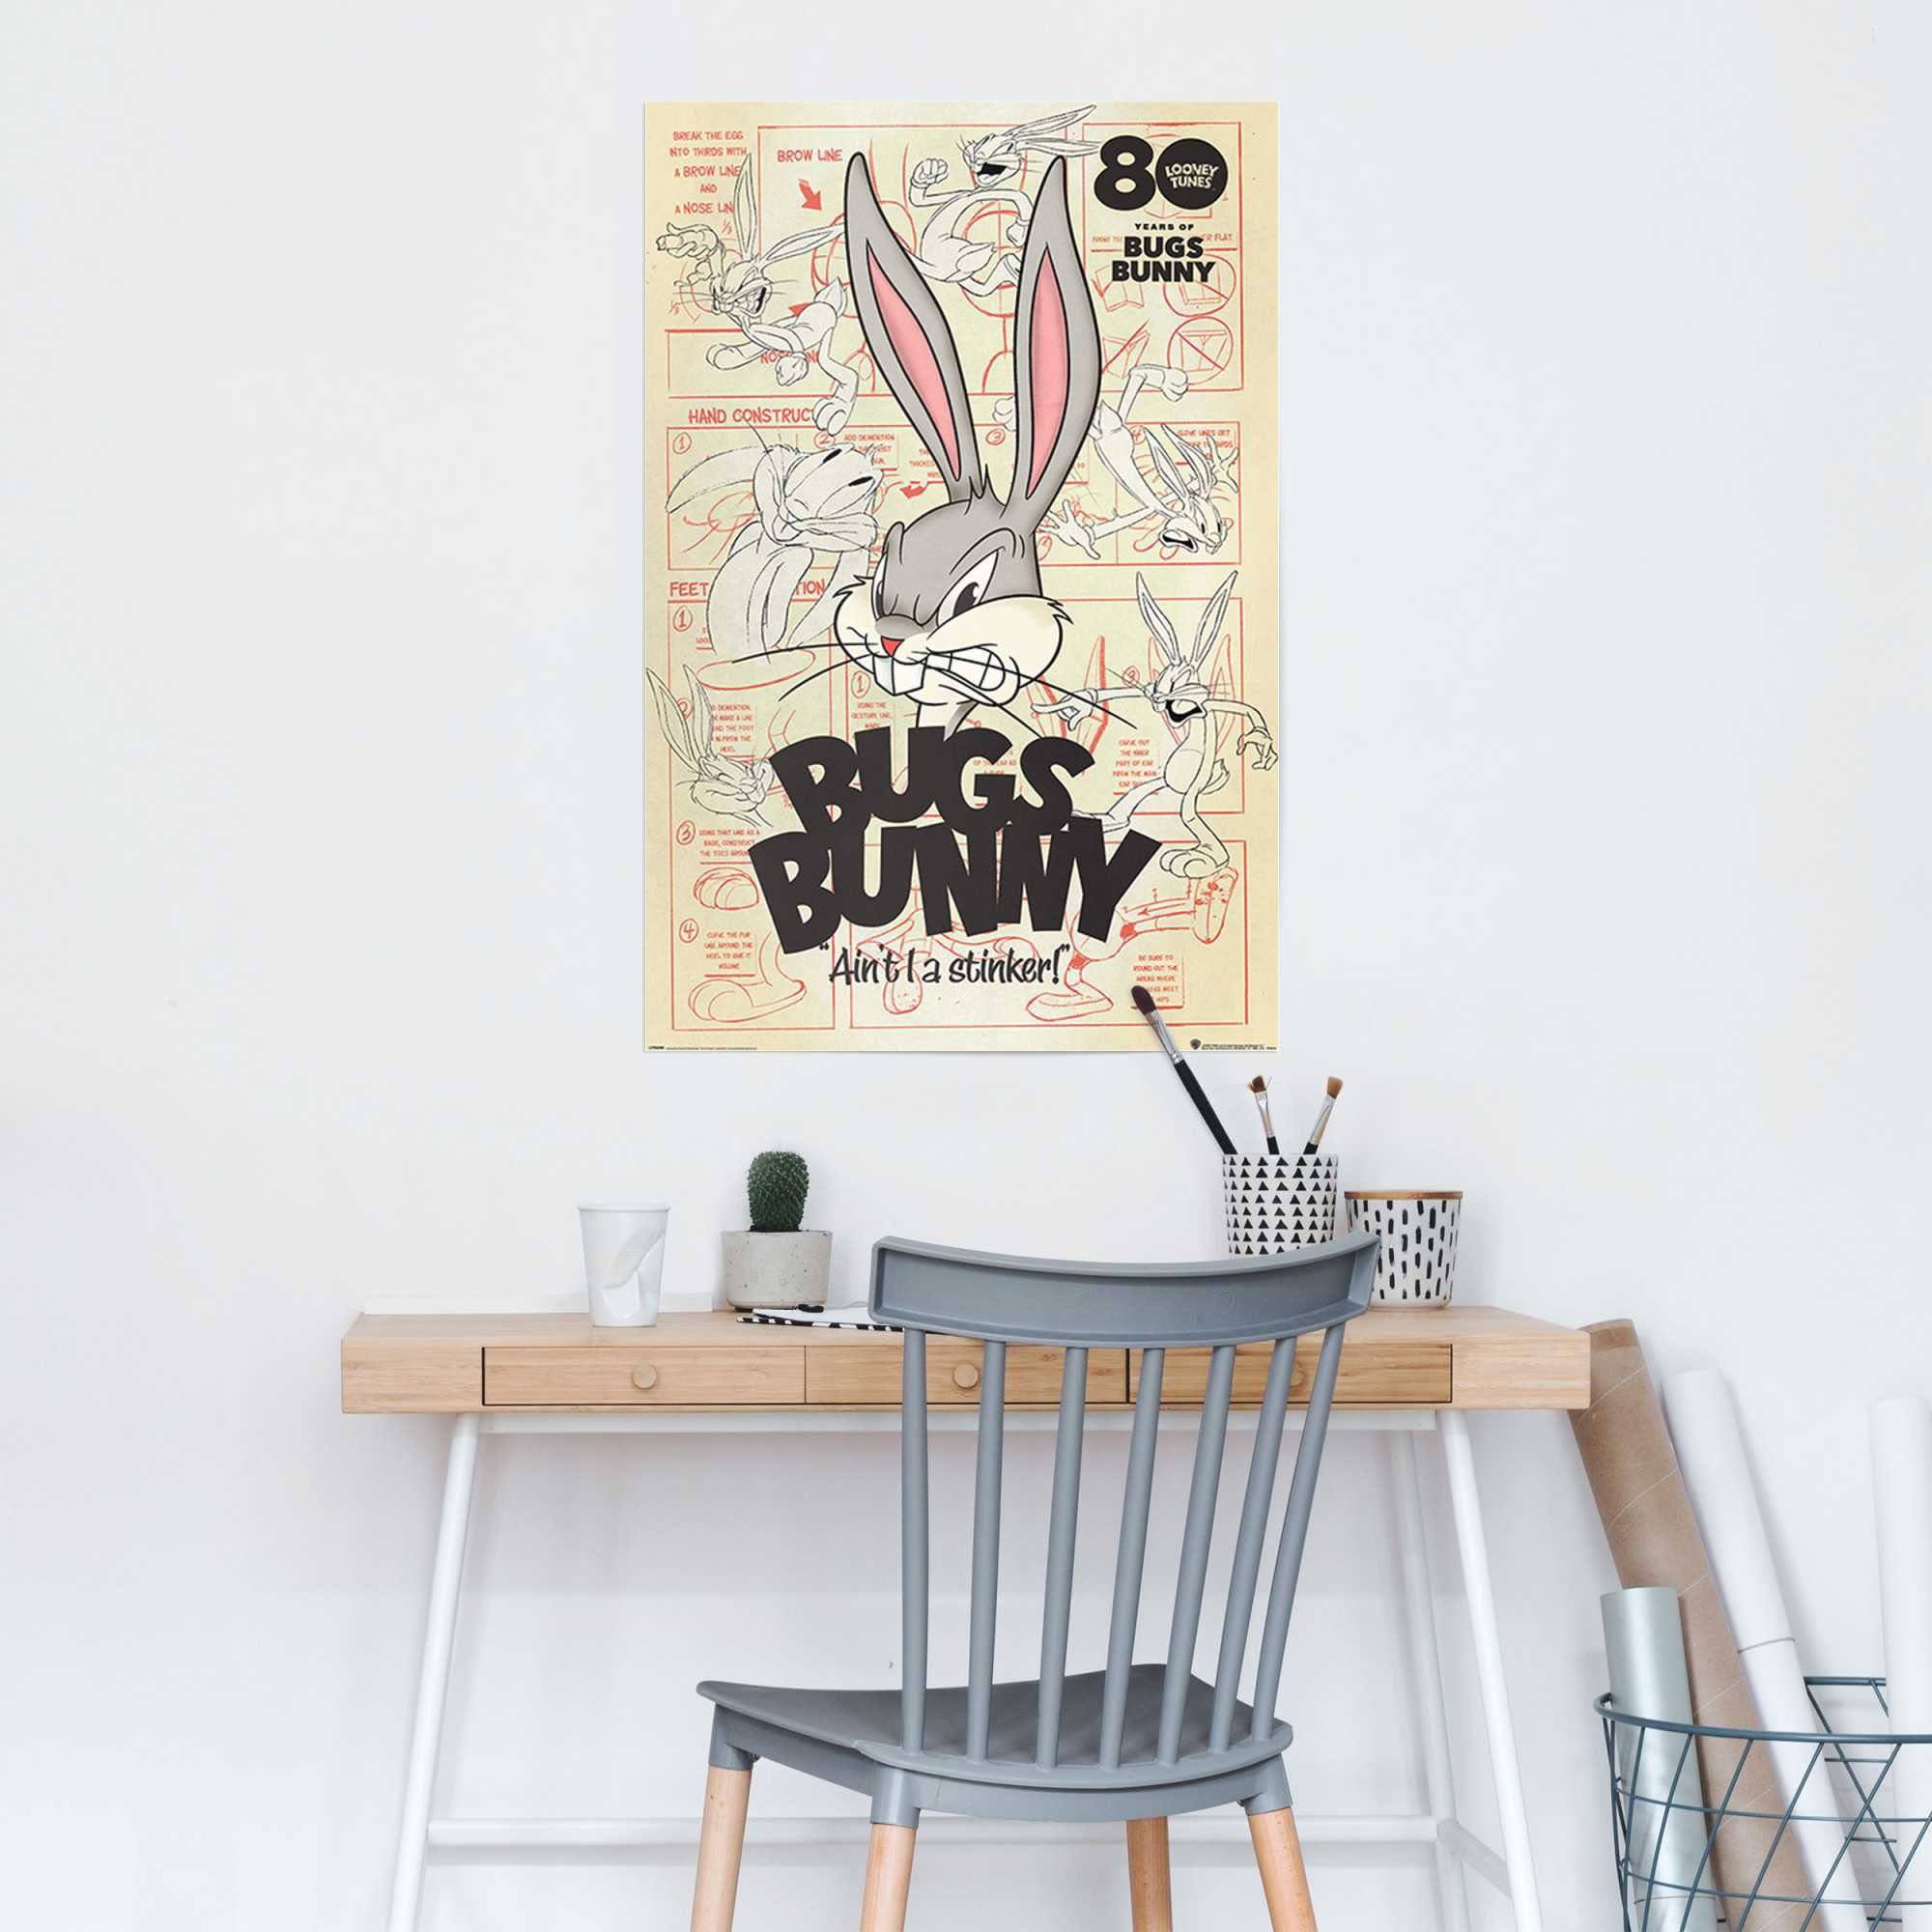 Bros a Bugs (1 stinker - Bunny I - Hase, Tunes Warner Poster Looney St) ait Reinders!